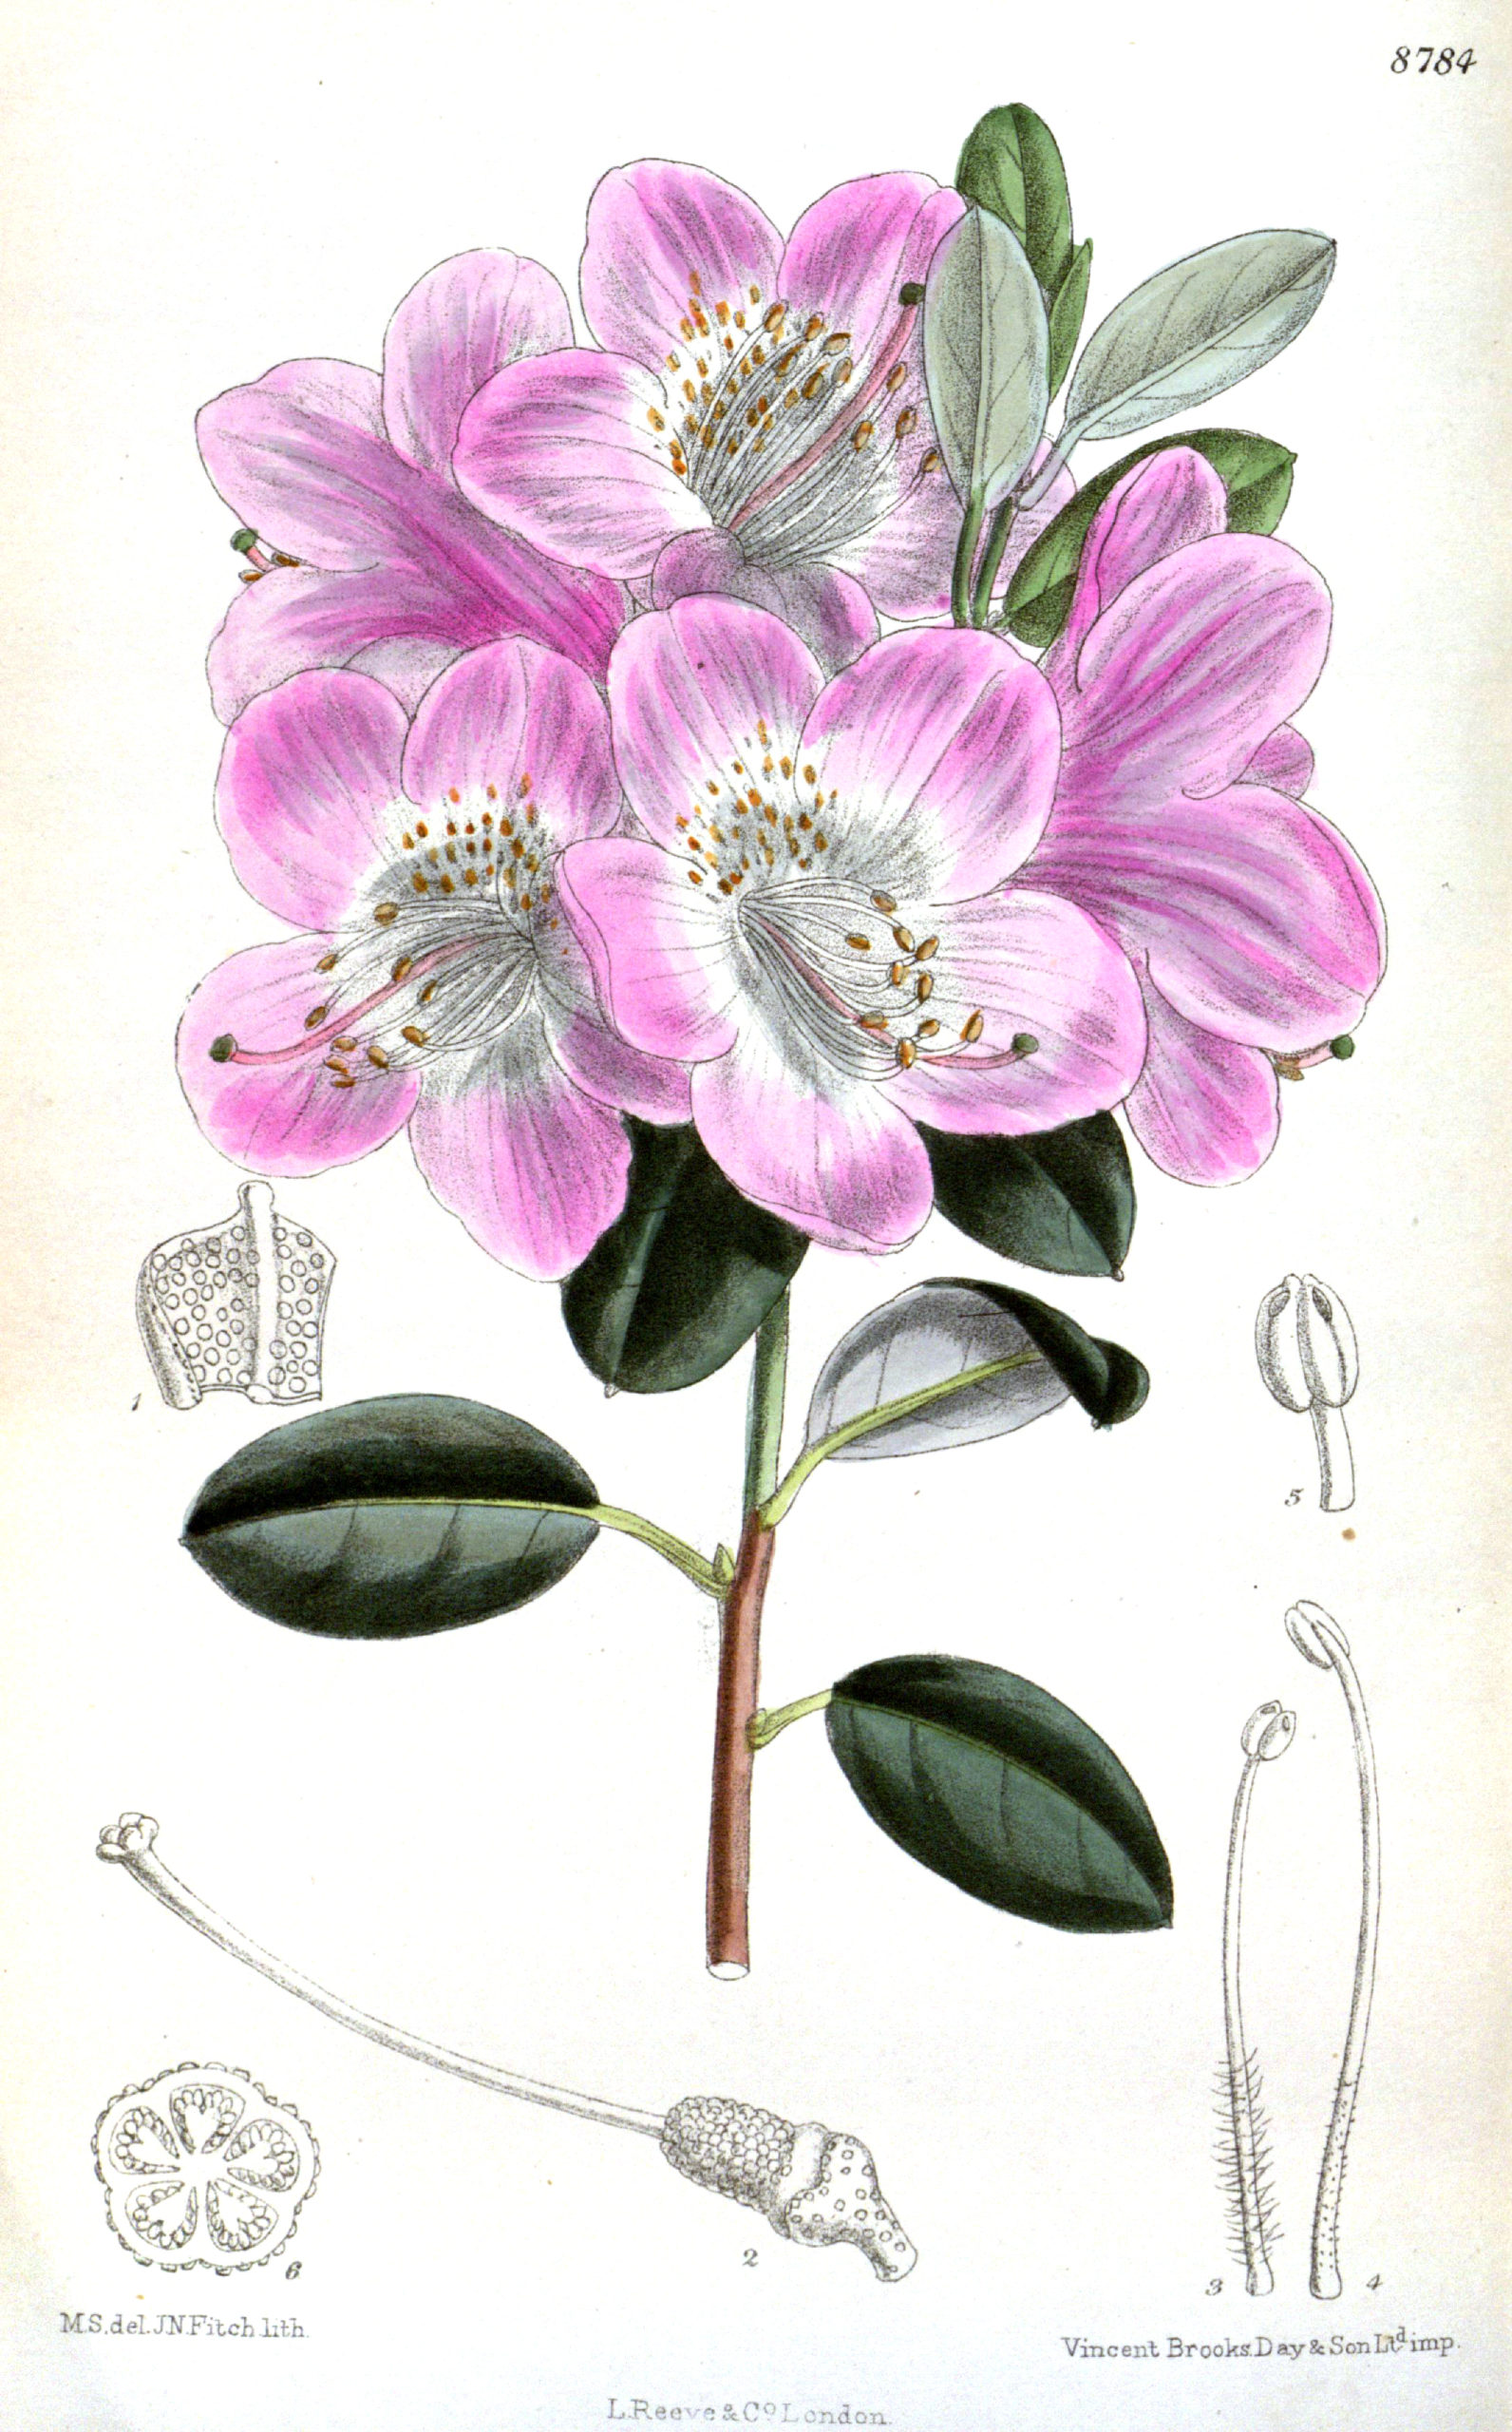 Vintage Botanical Prints - 56 in a series -  Rhododendron oreotrephes (1801) from Curtis's botanical magazine